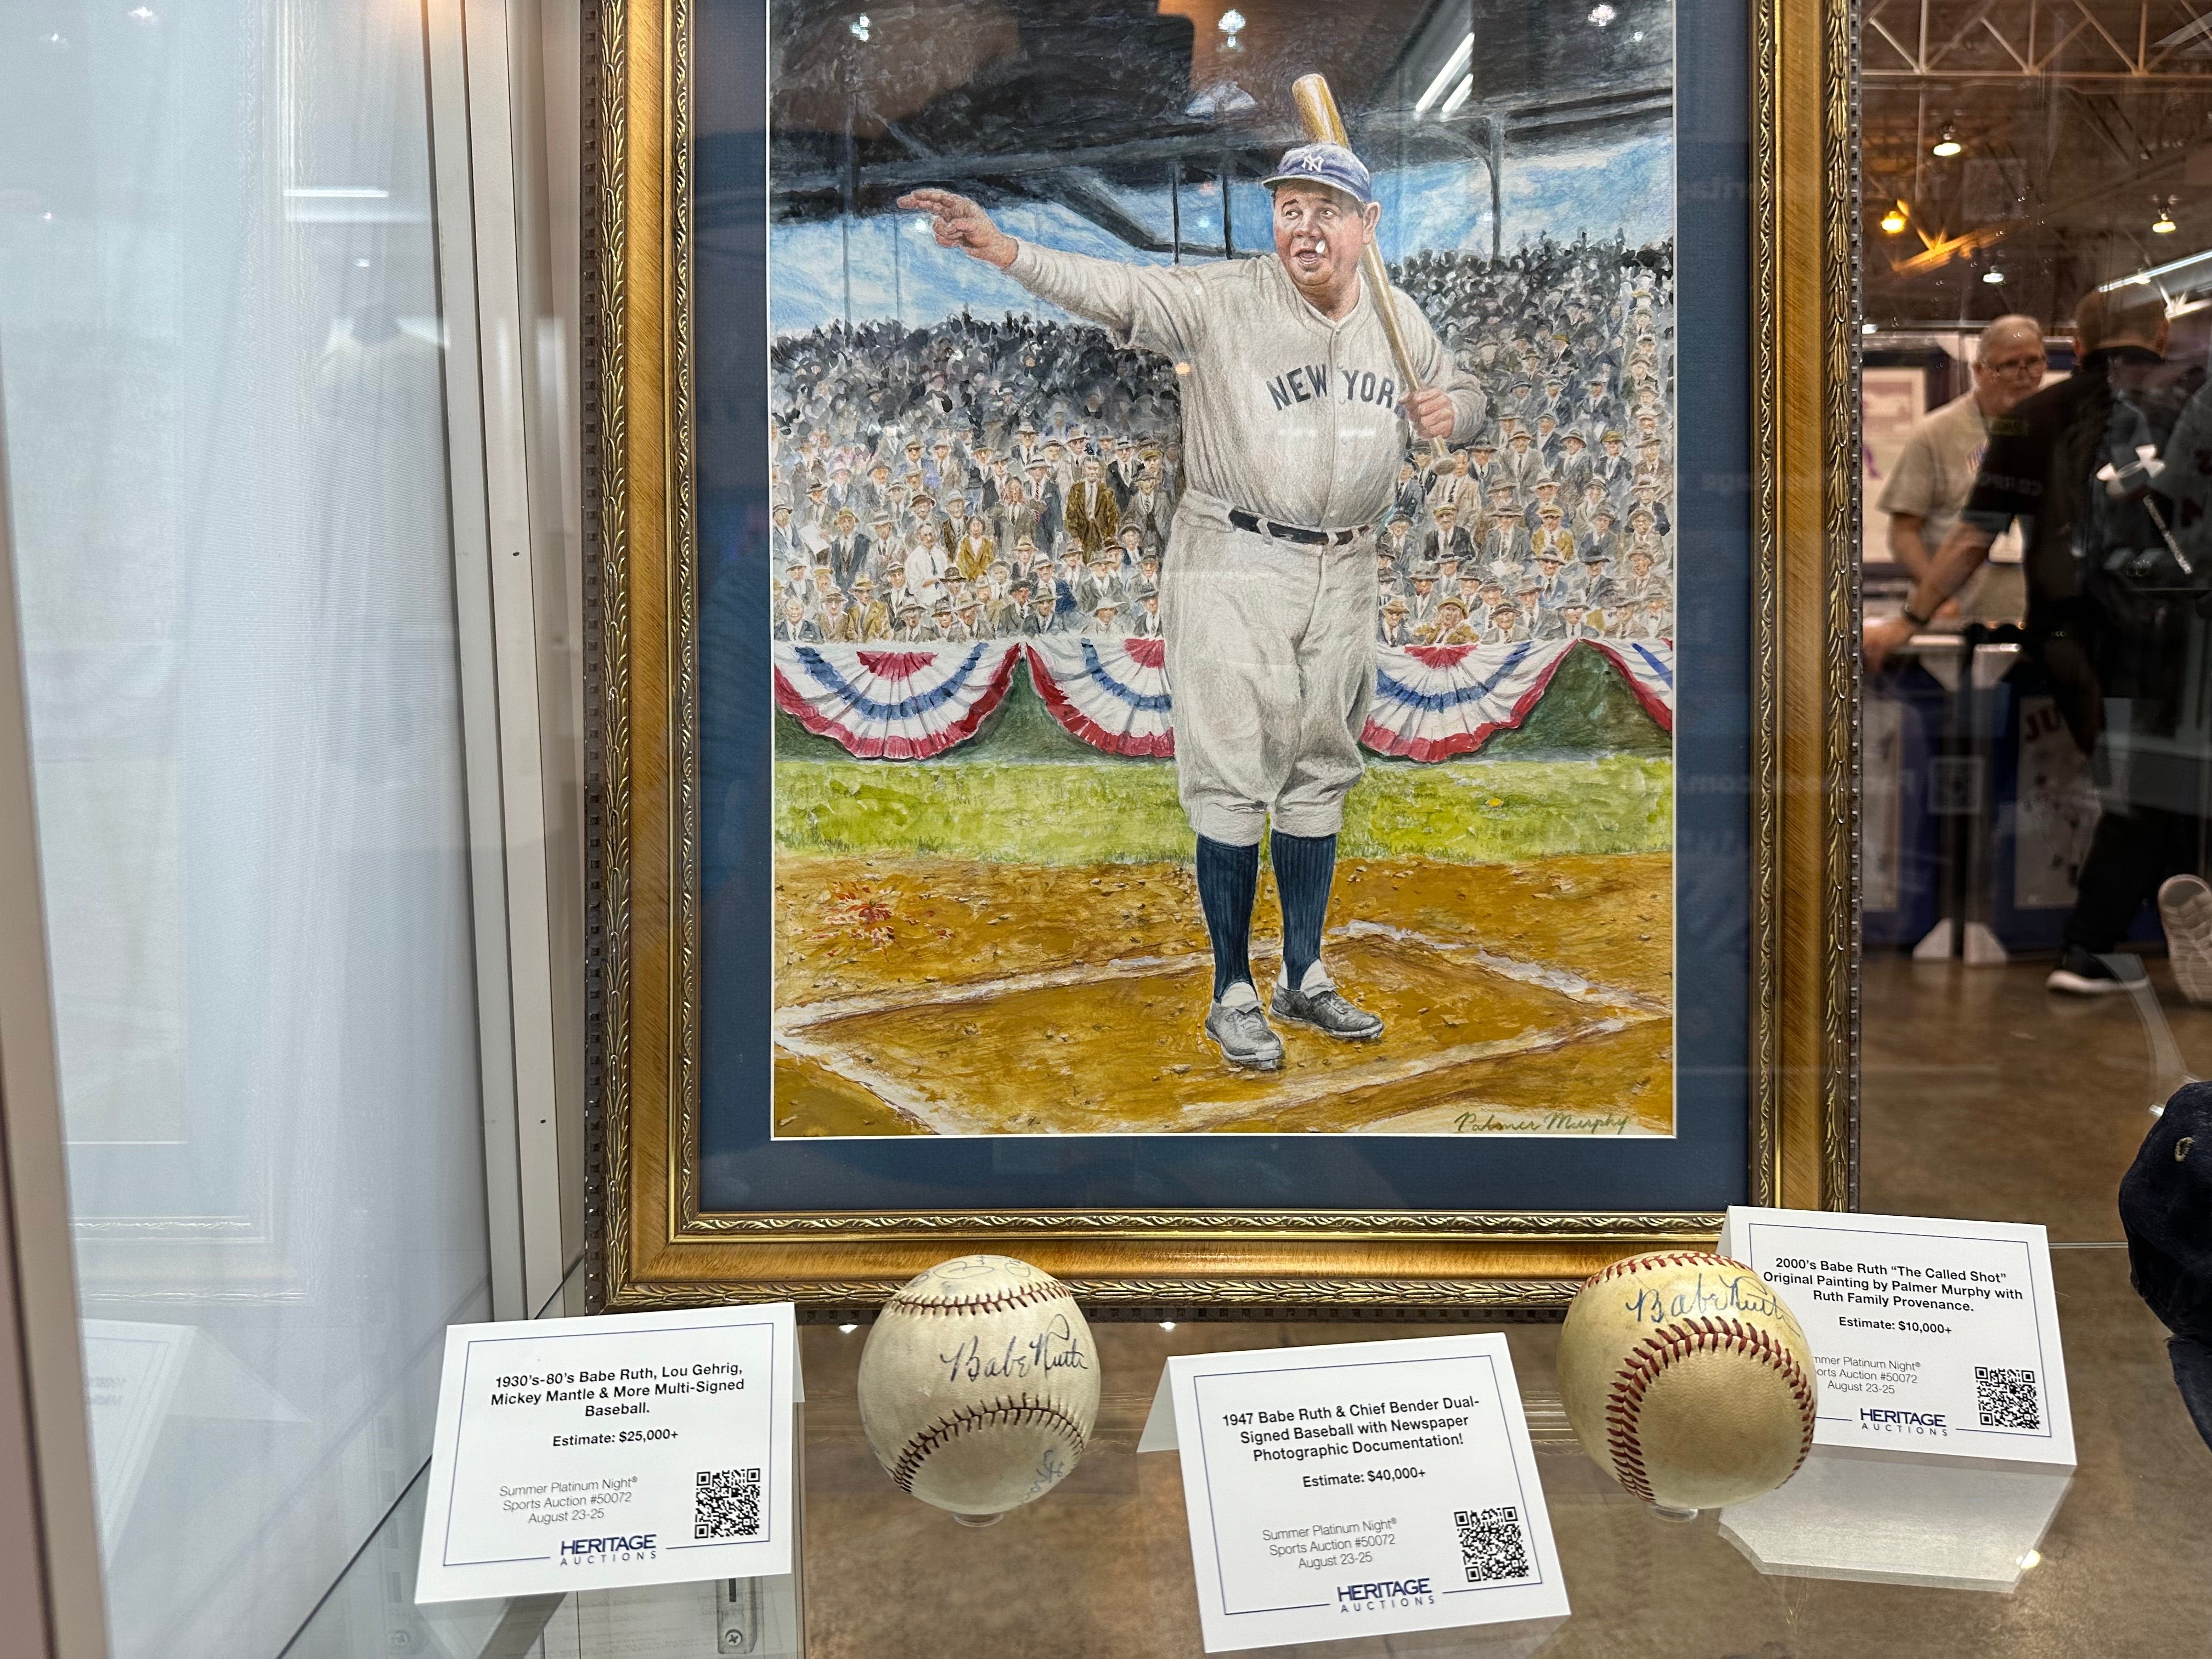 The 5 most mind-blowing items at the National Sports Card Convention in Cleveland